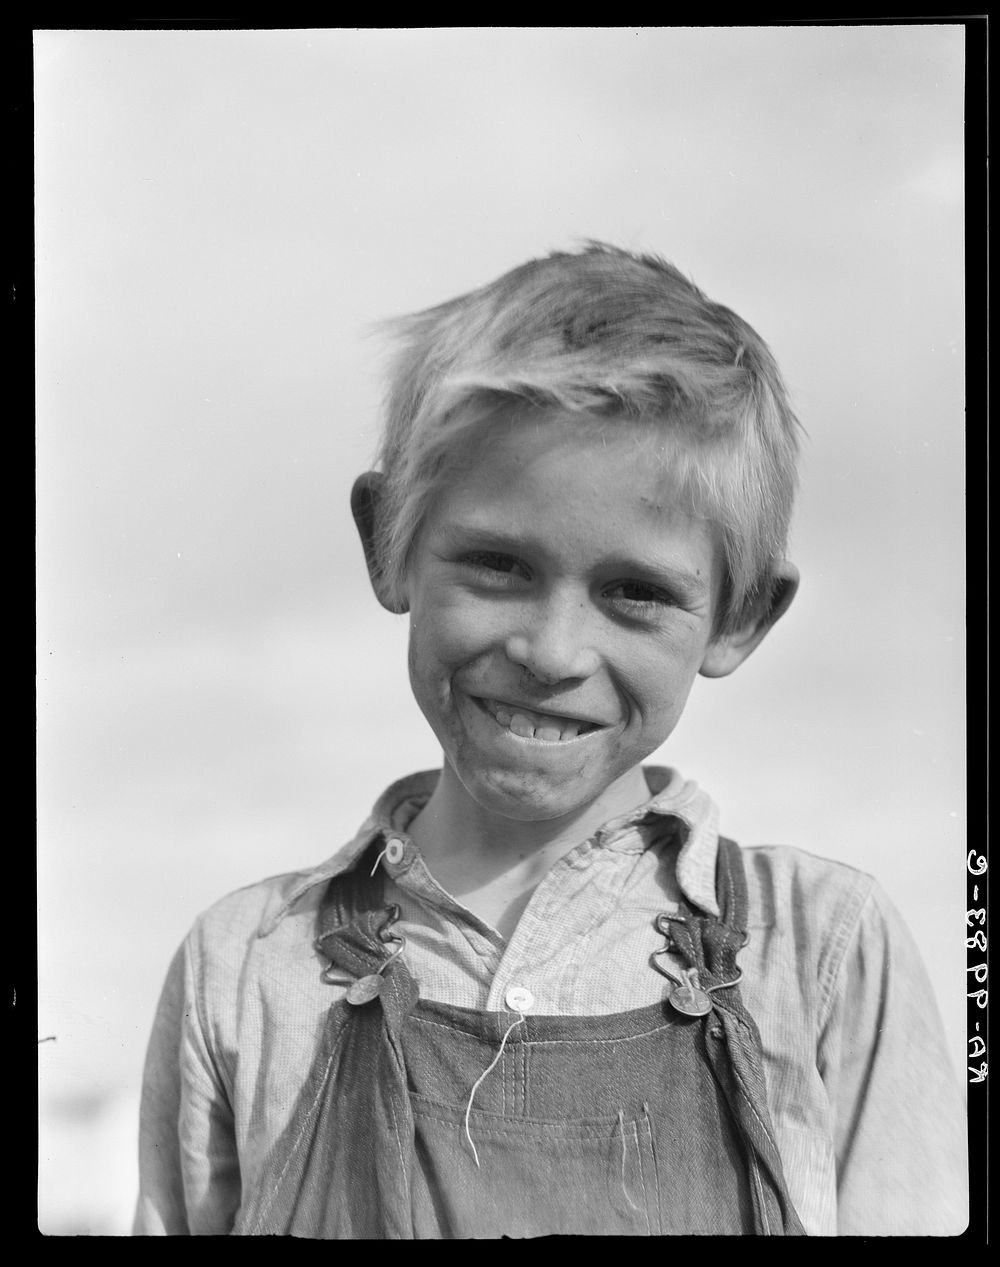 Son of cotton picker living in squatters' camp near Farmersville, California by Dorothea Lange